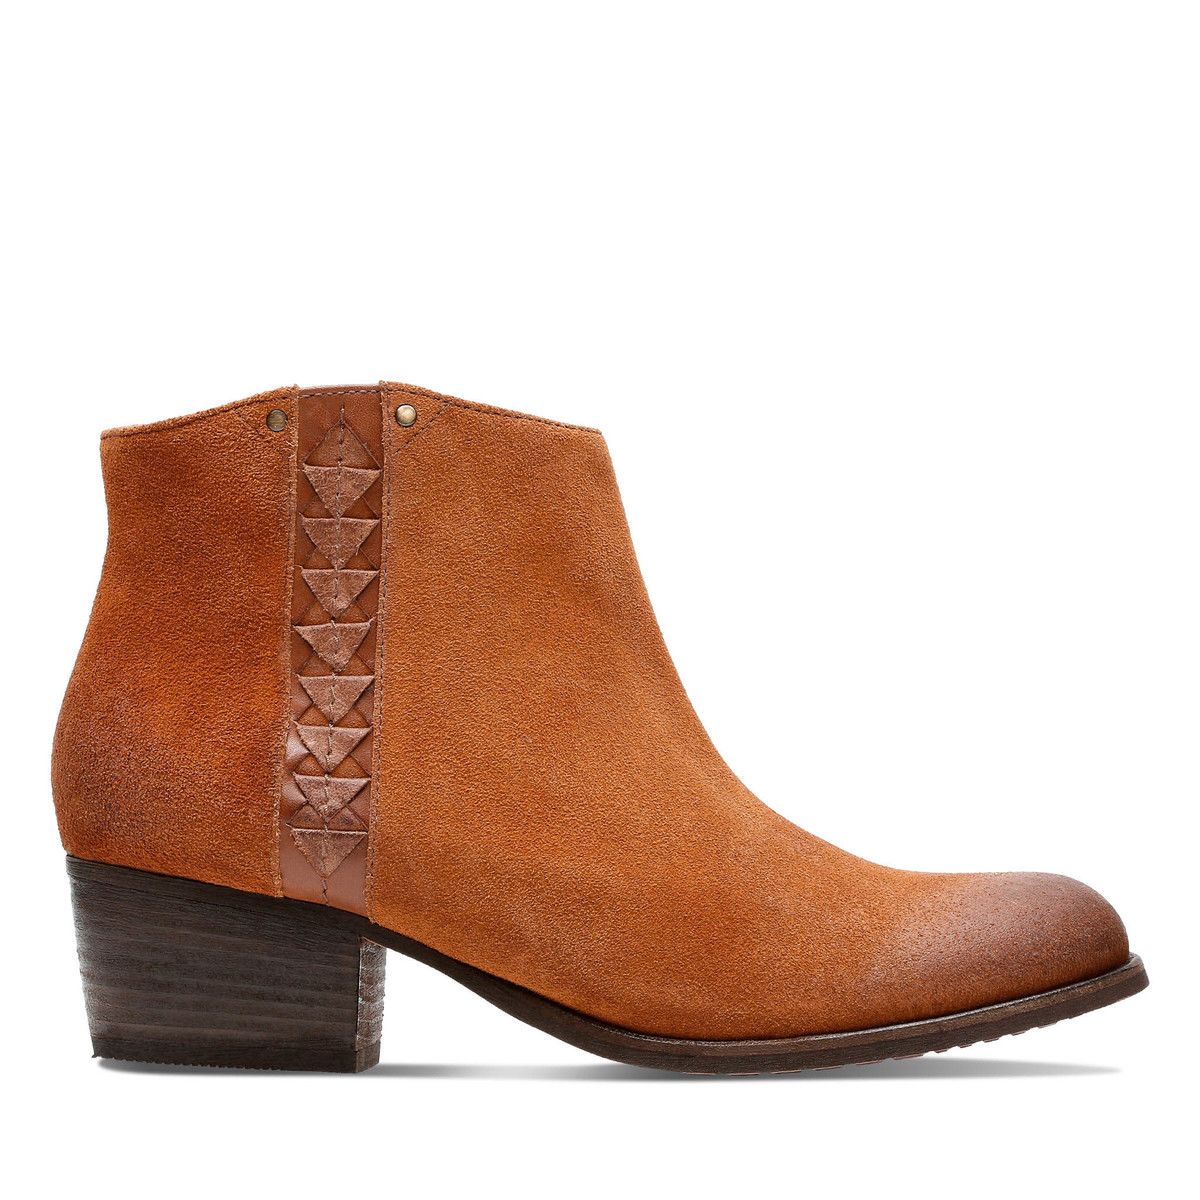 clarks tan suede ankle boots